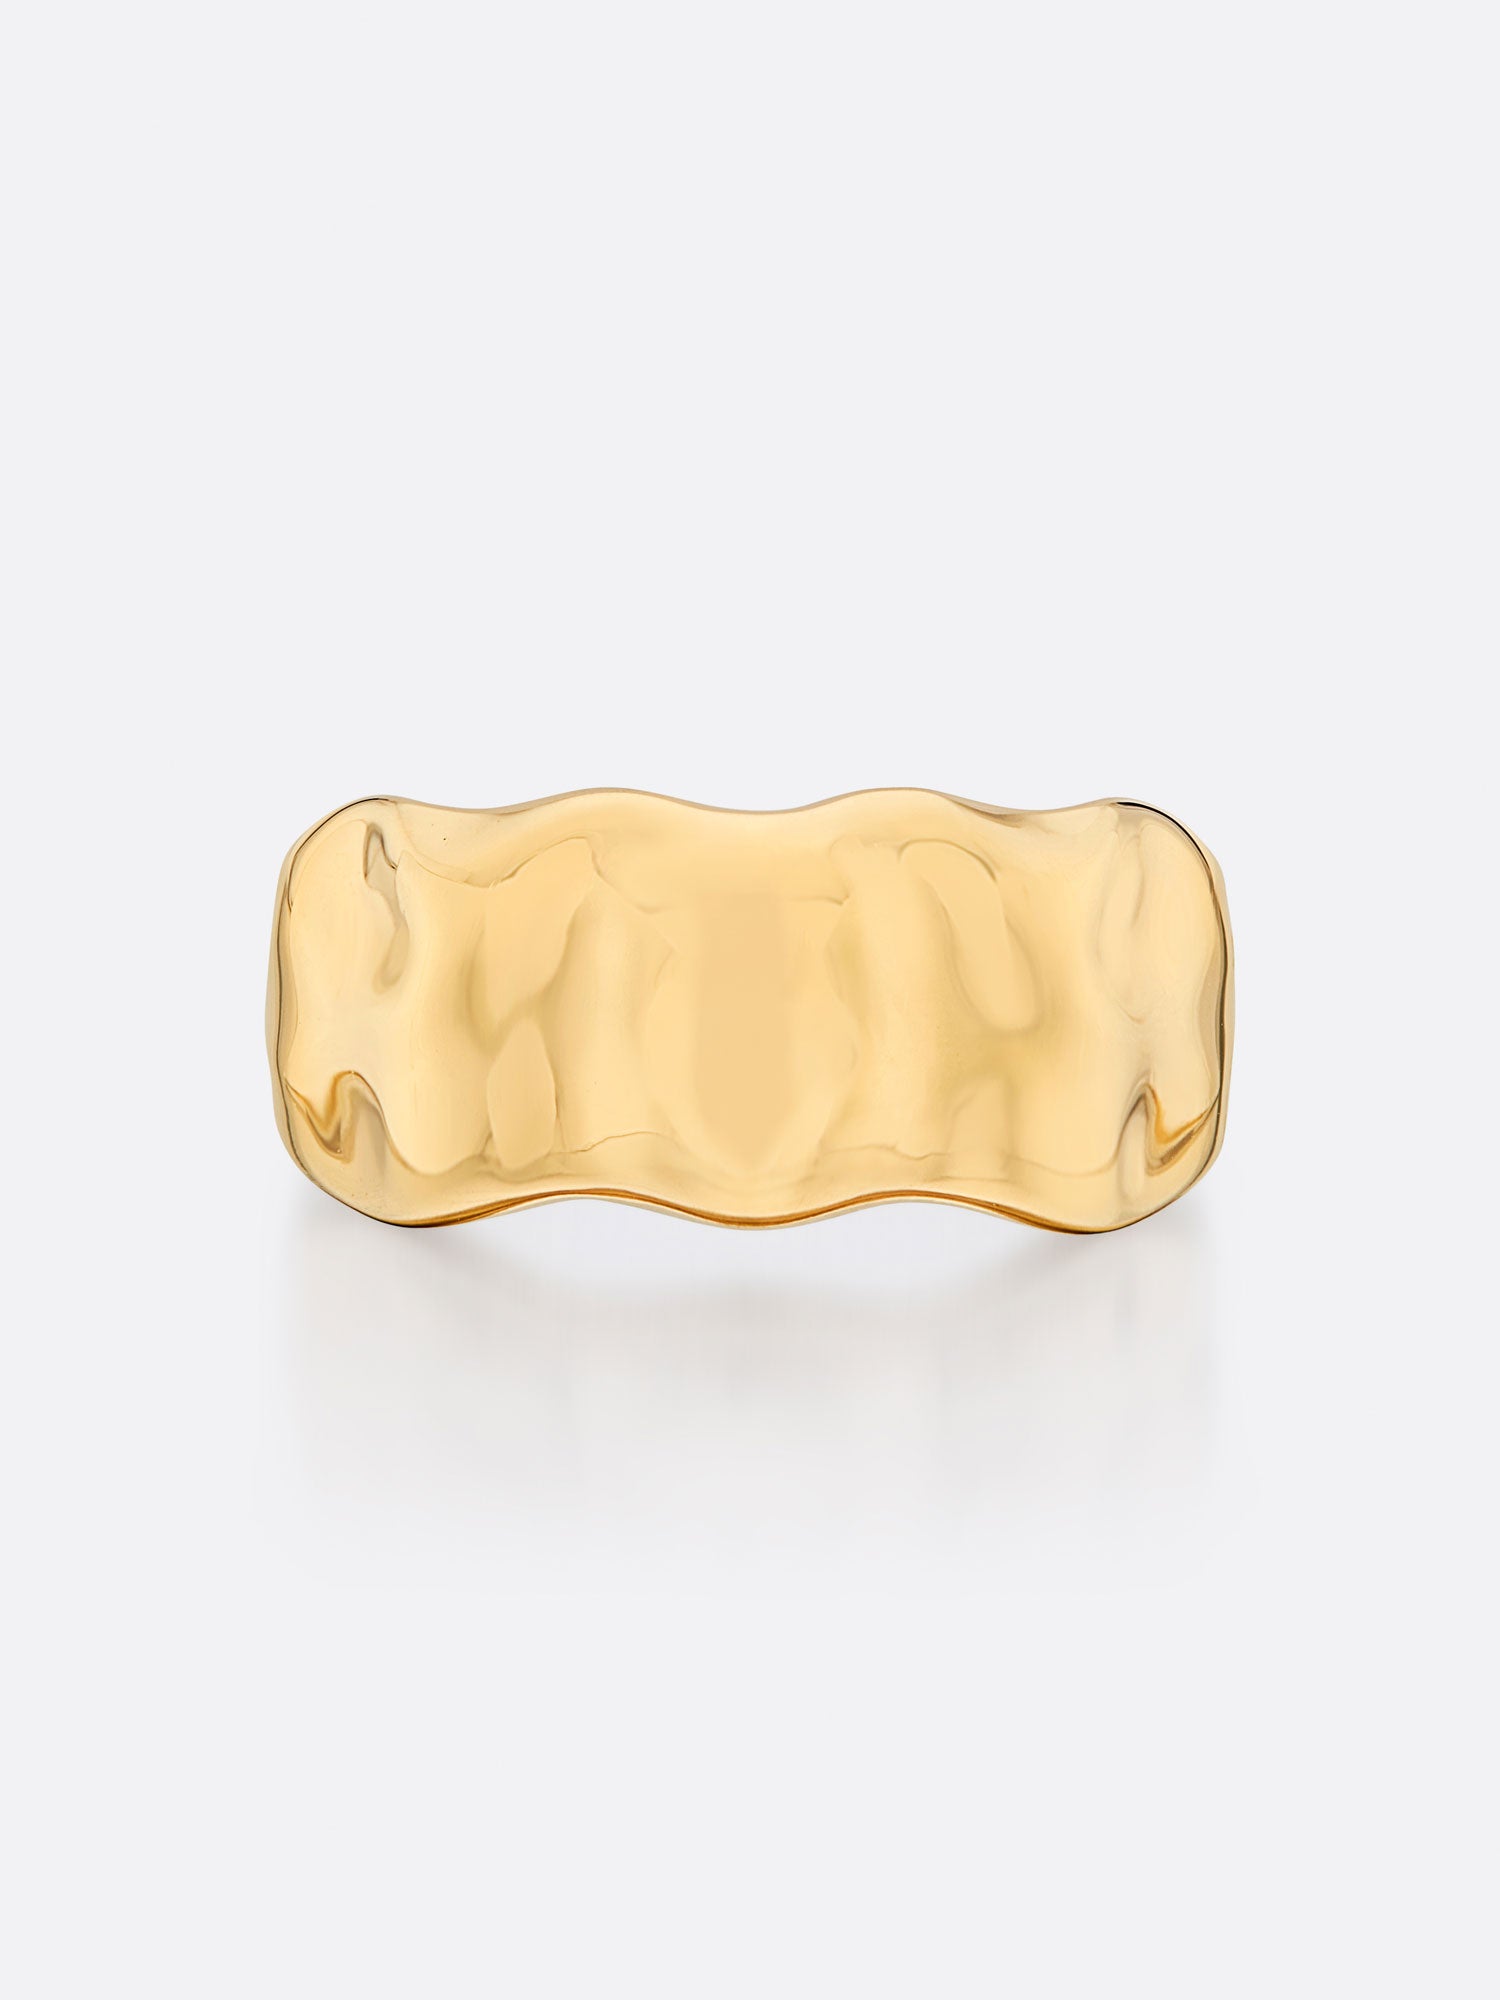 18k Yellow gold band ring front view